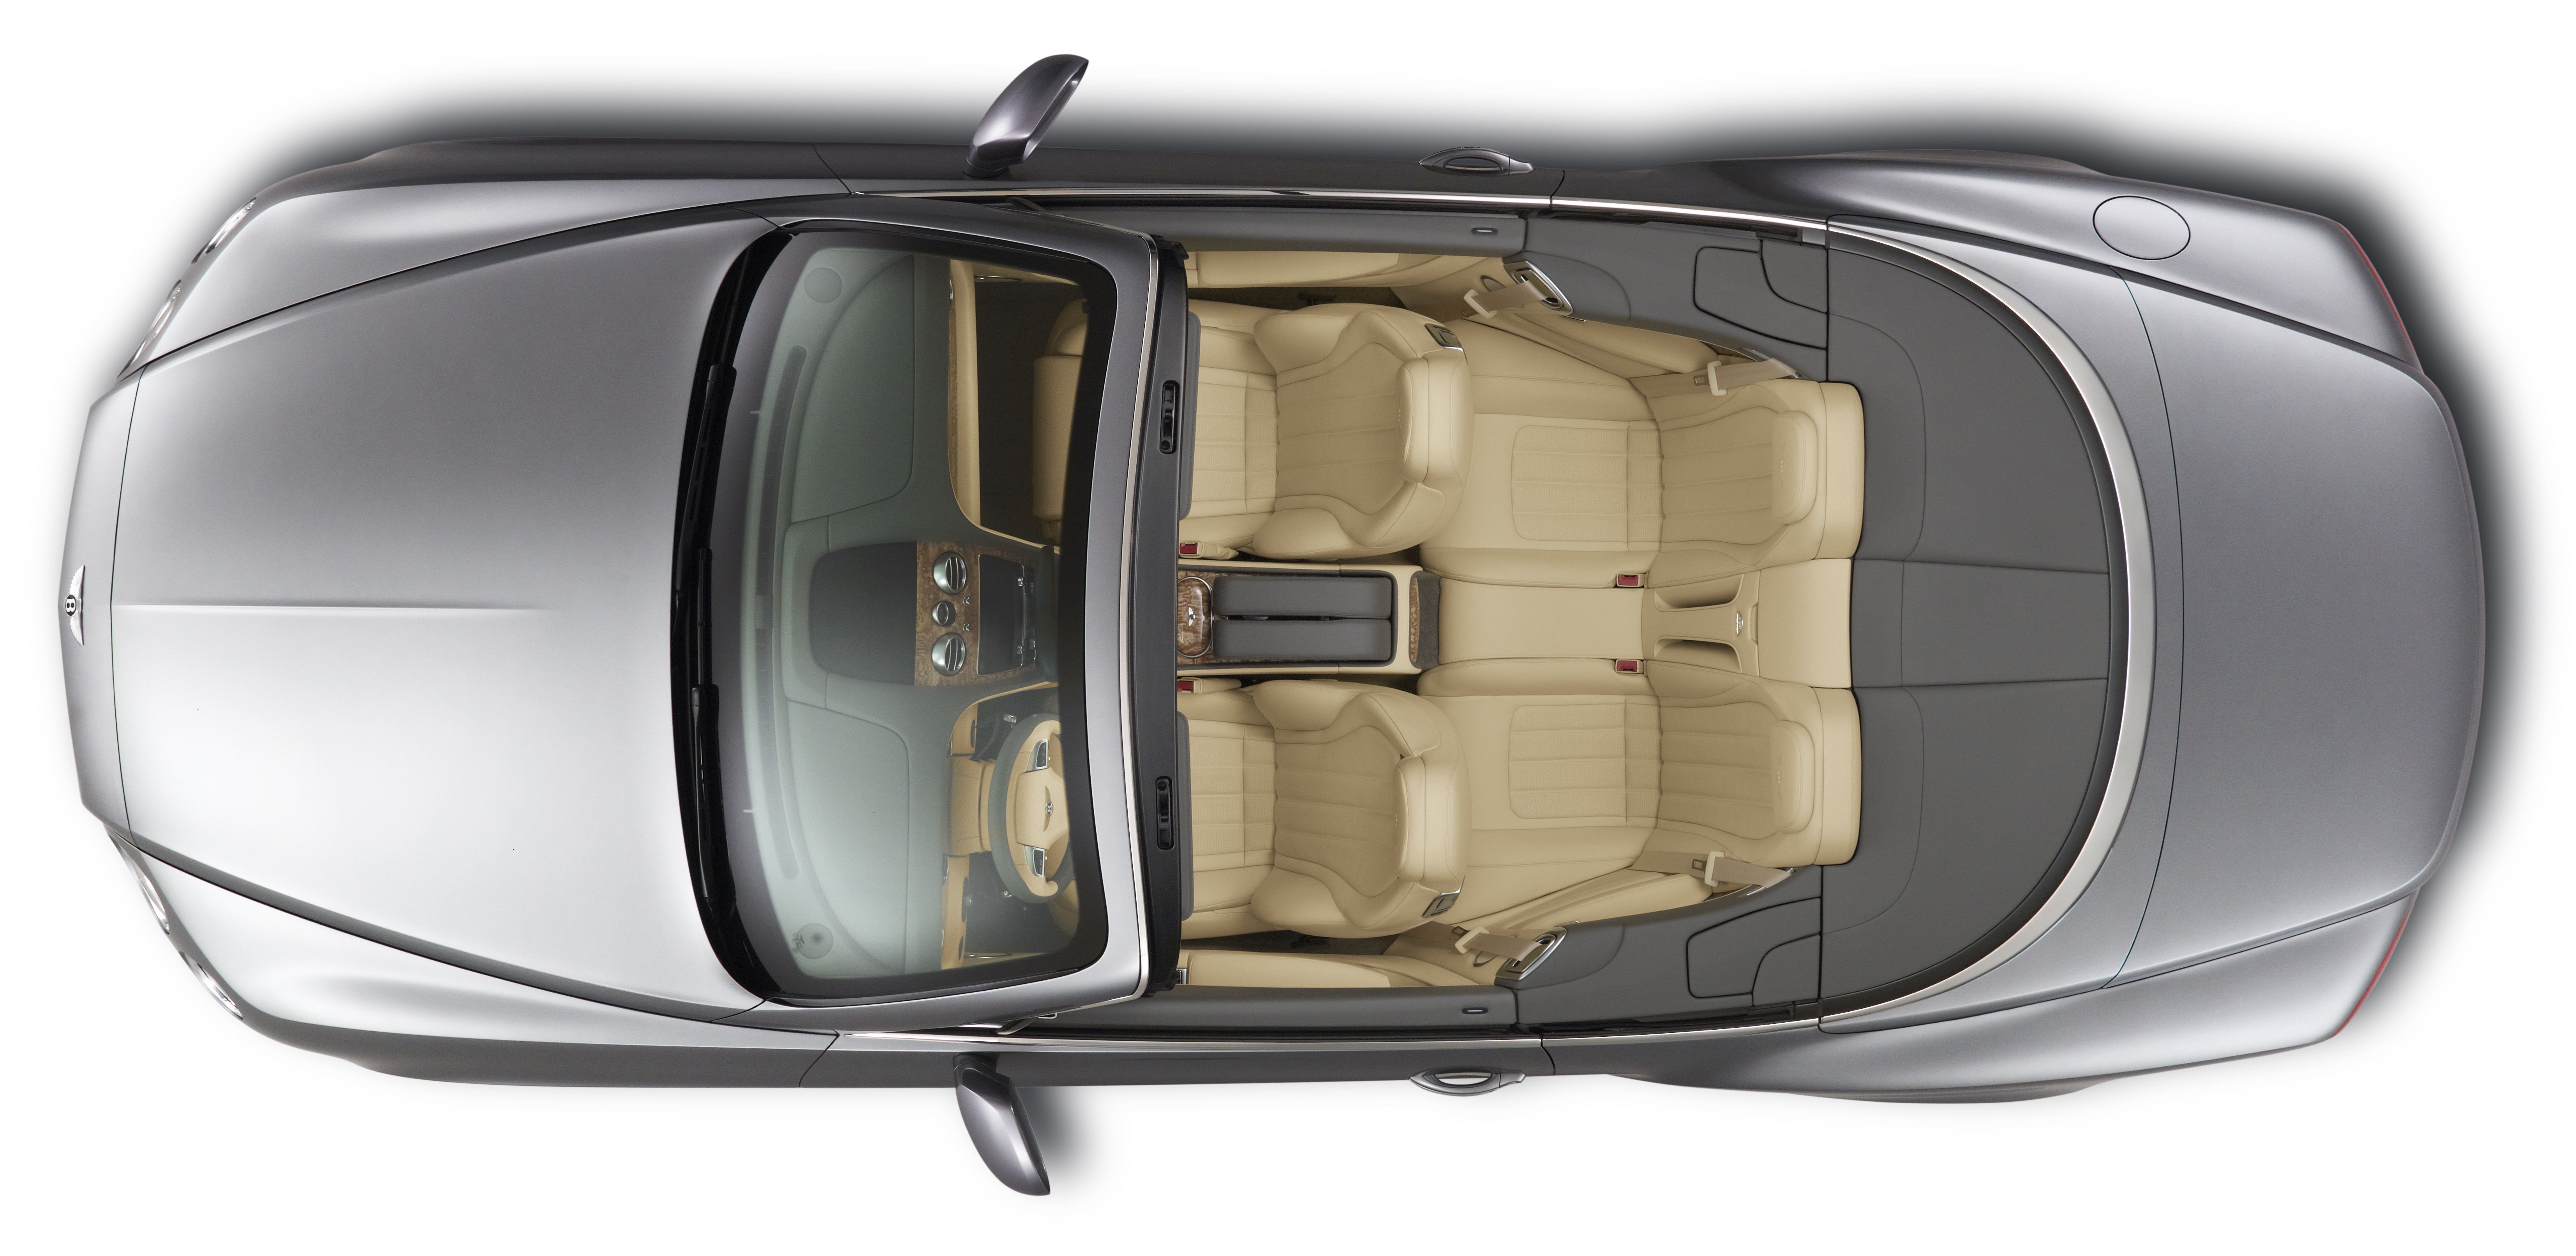 Top View Of A Car PNG Transparent Top View Of A Car.PNG Images.